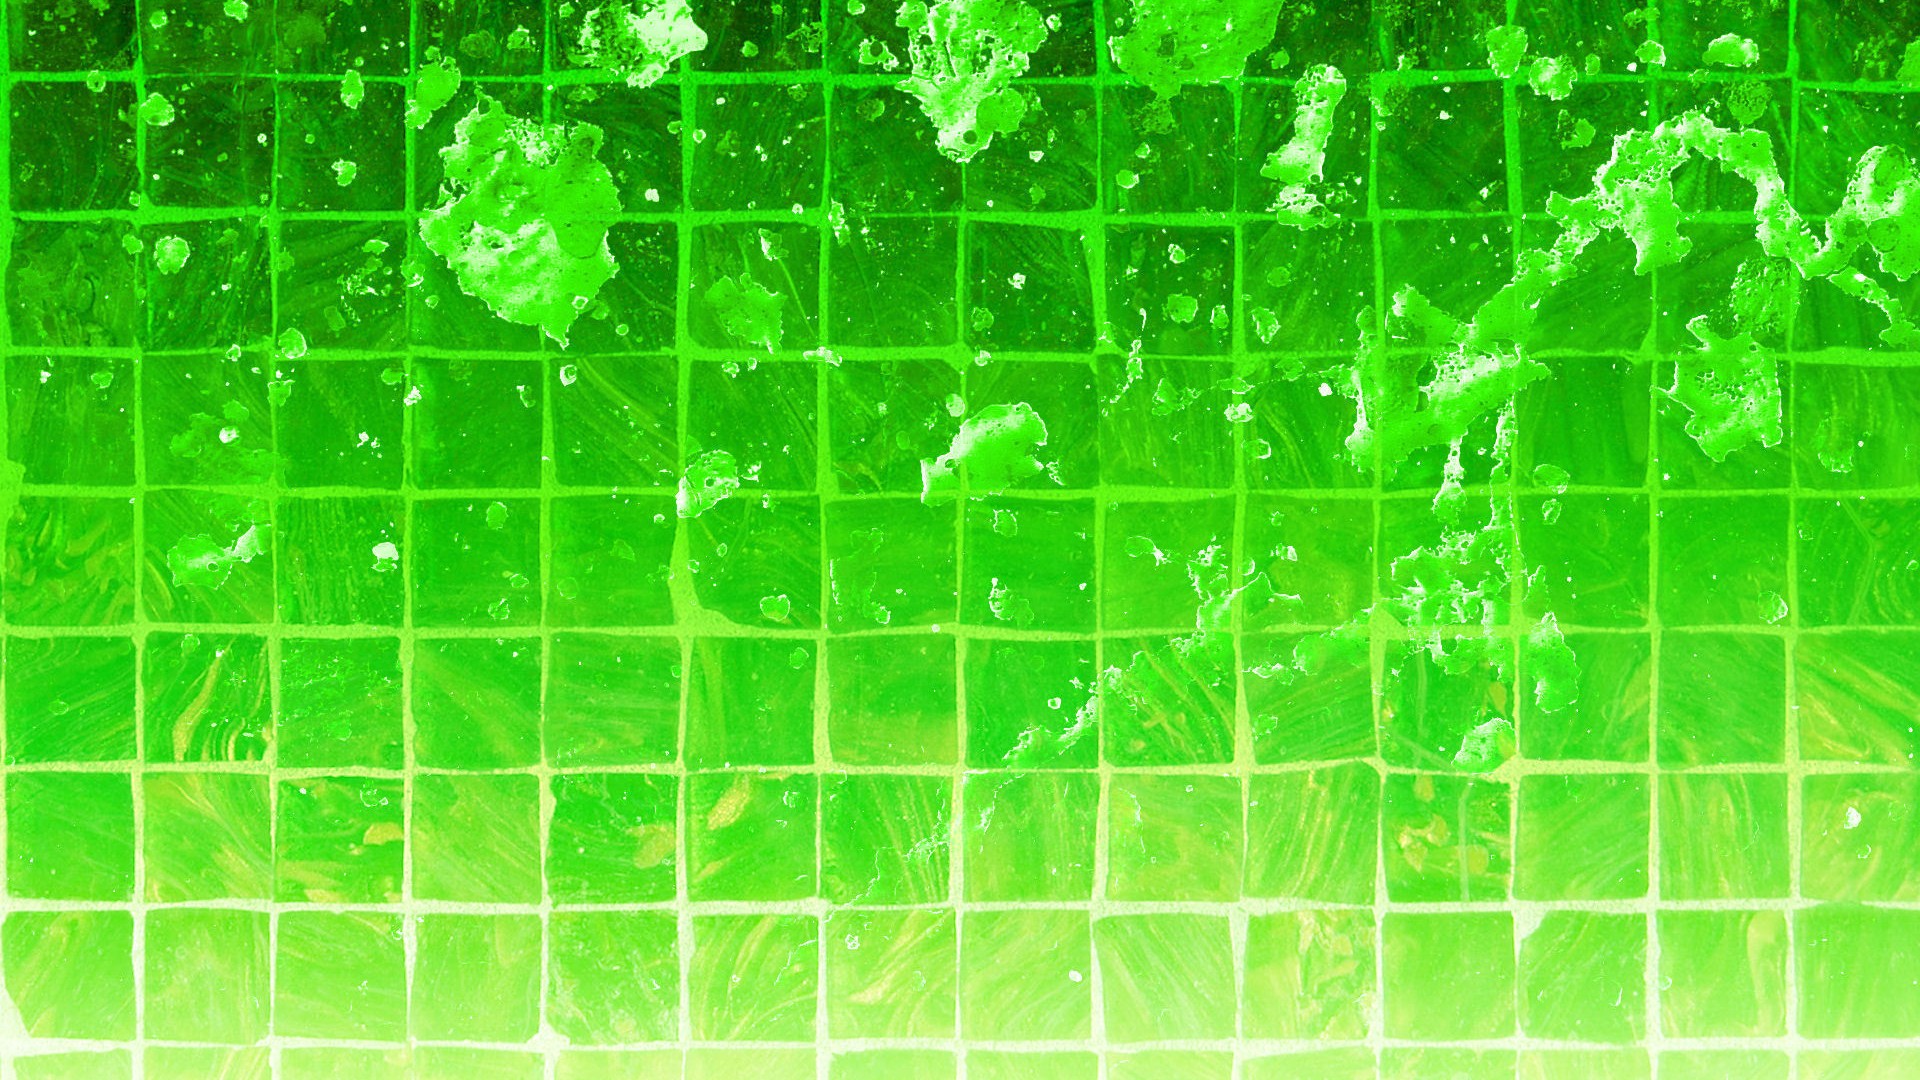 Lime Green Wallpaper HD With Resolution 1920X1080 pixel. You can make this wallpaper for your Desktop Computer Backgrounds, Mac Wallpapers, Android Lock screen or iPhone Screensavers